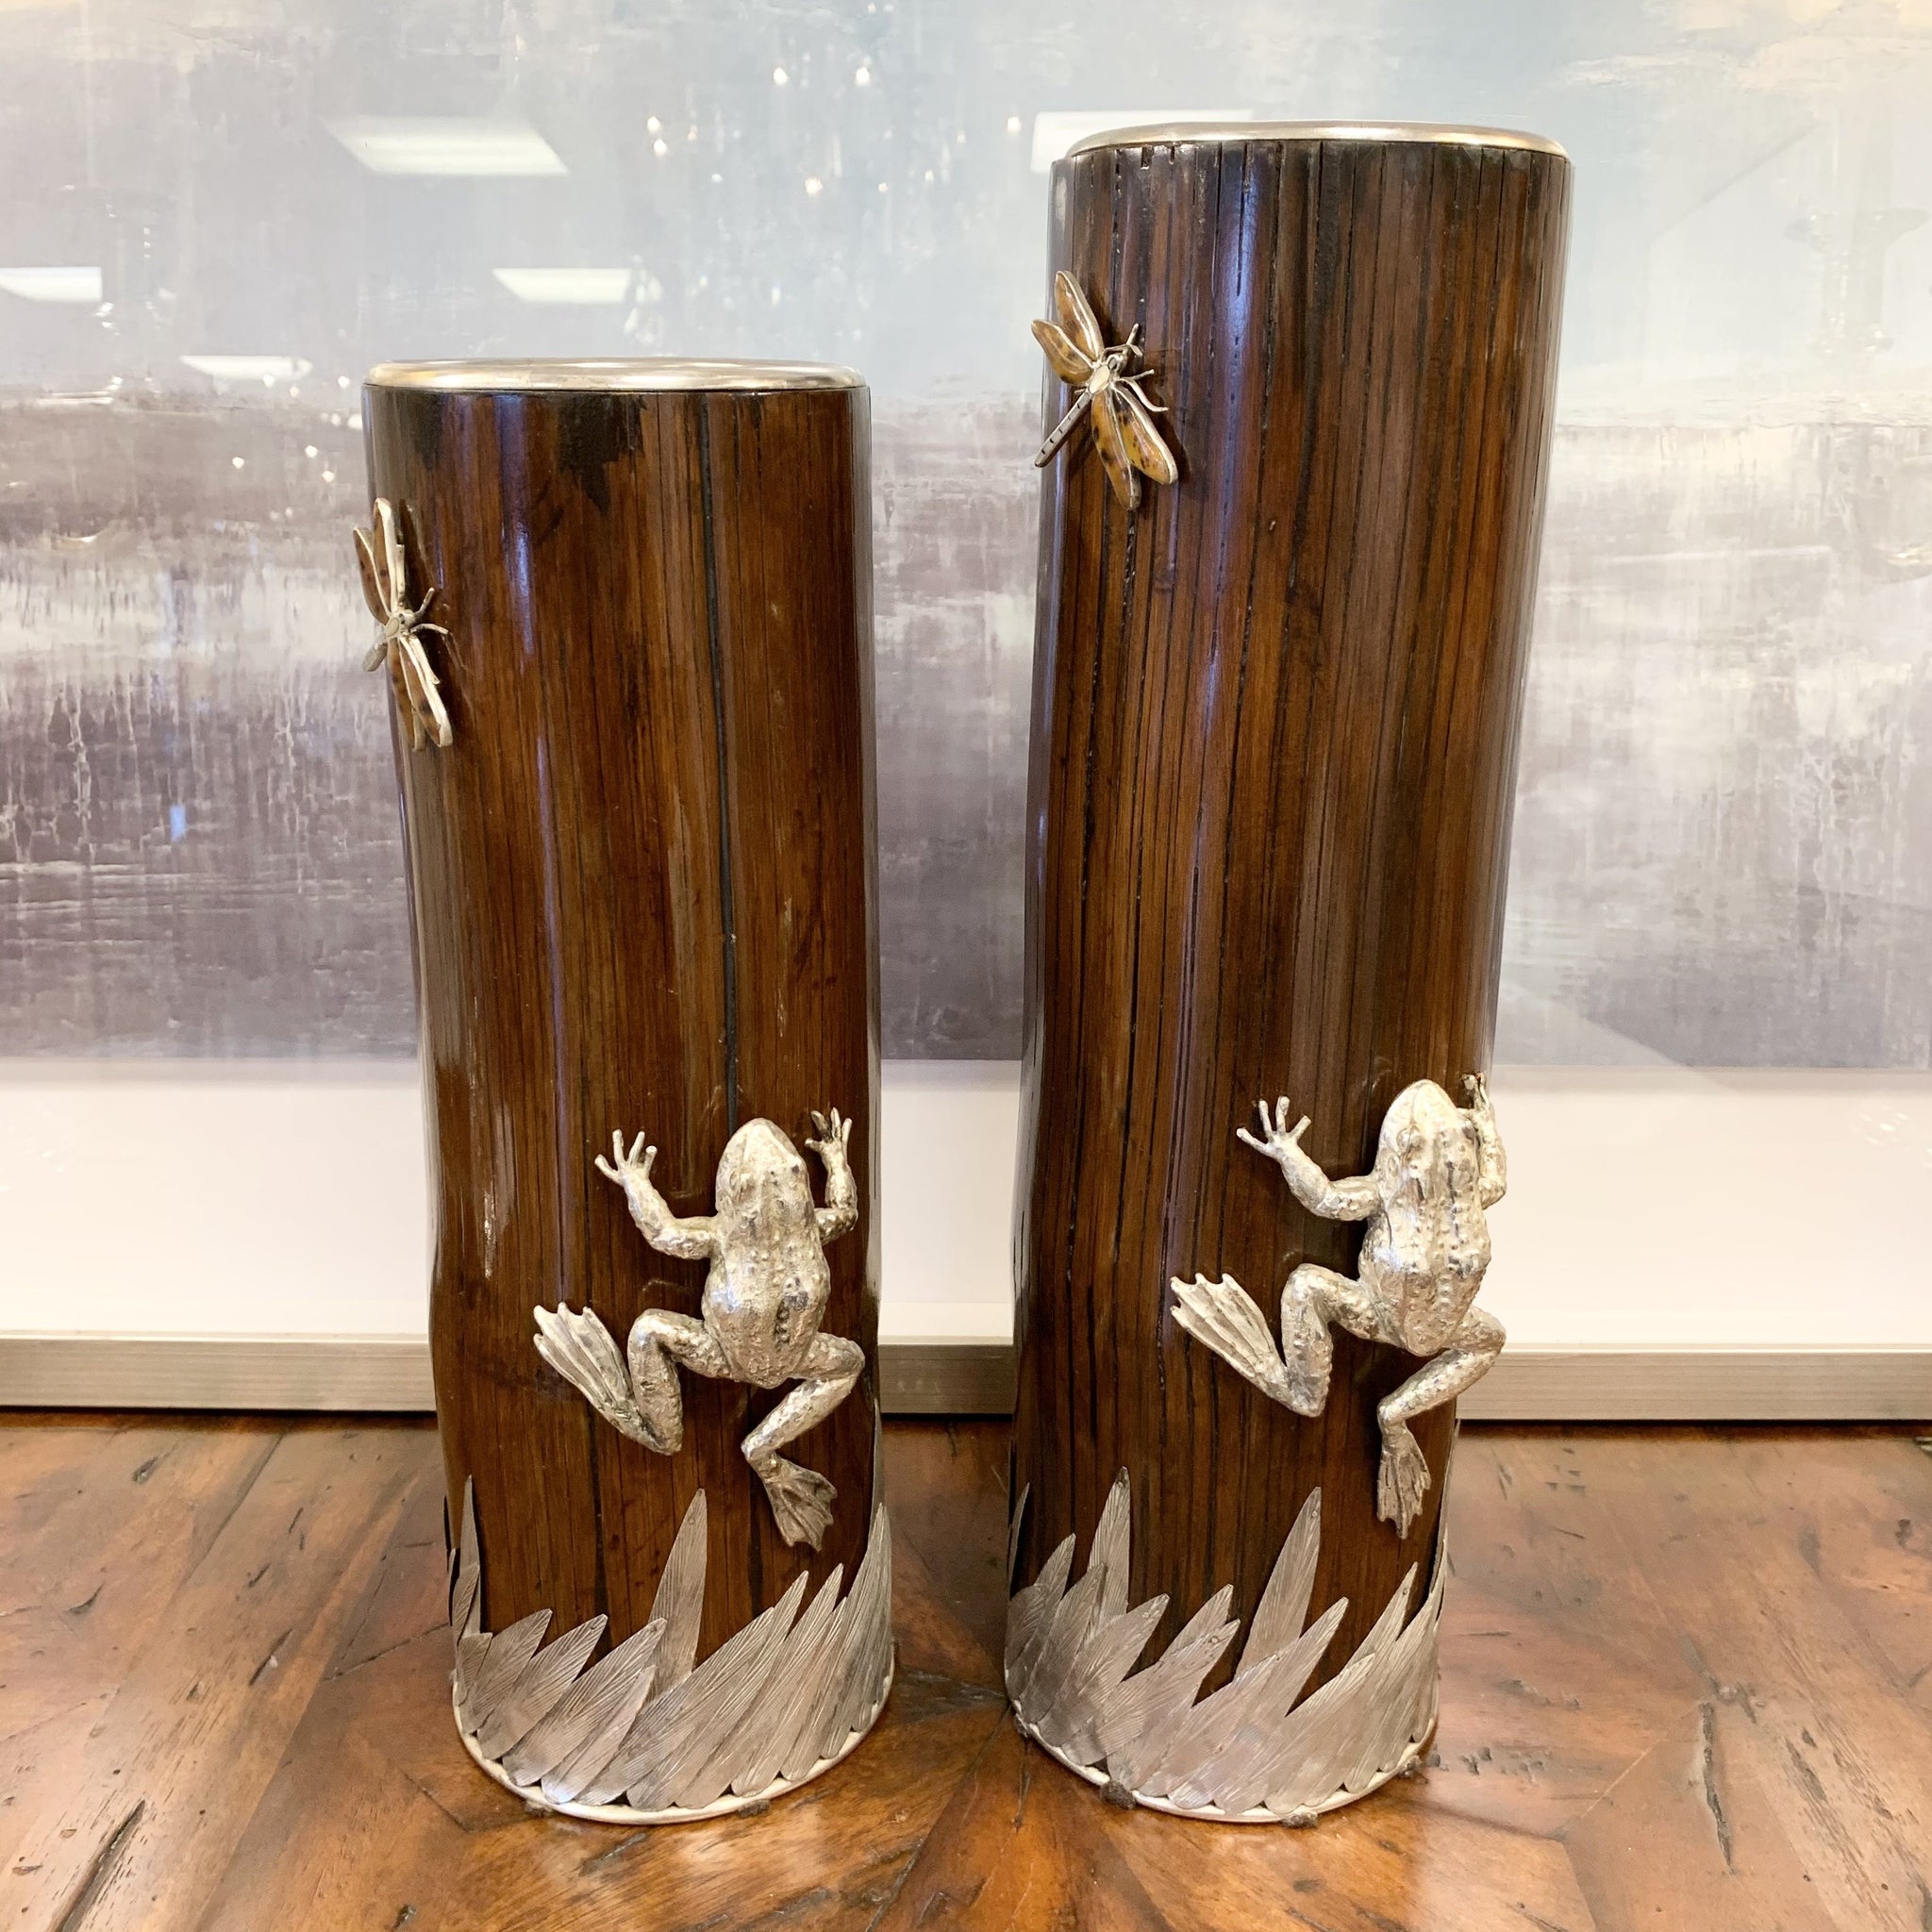 14" and 16" Bamboo Vase with Frog